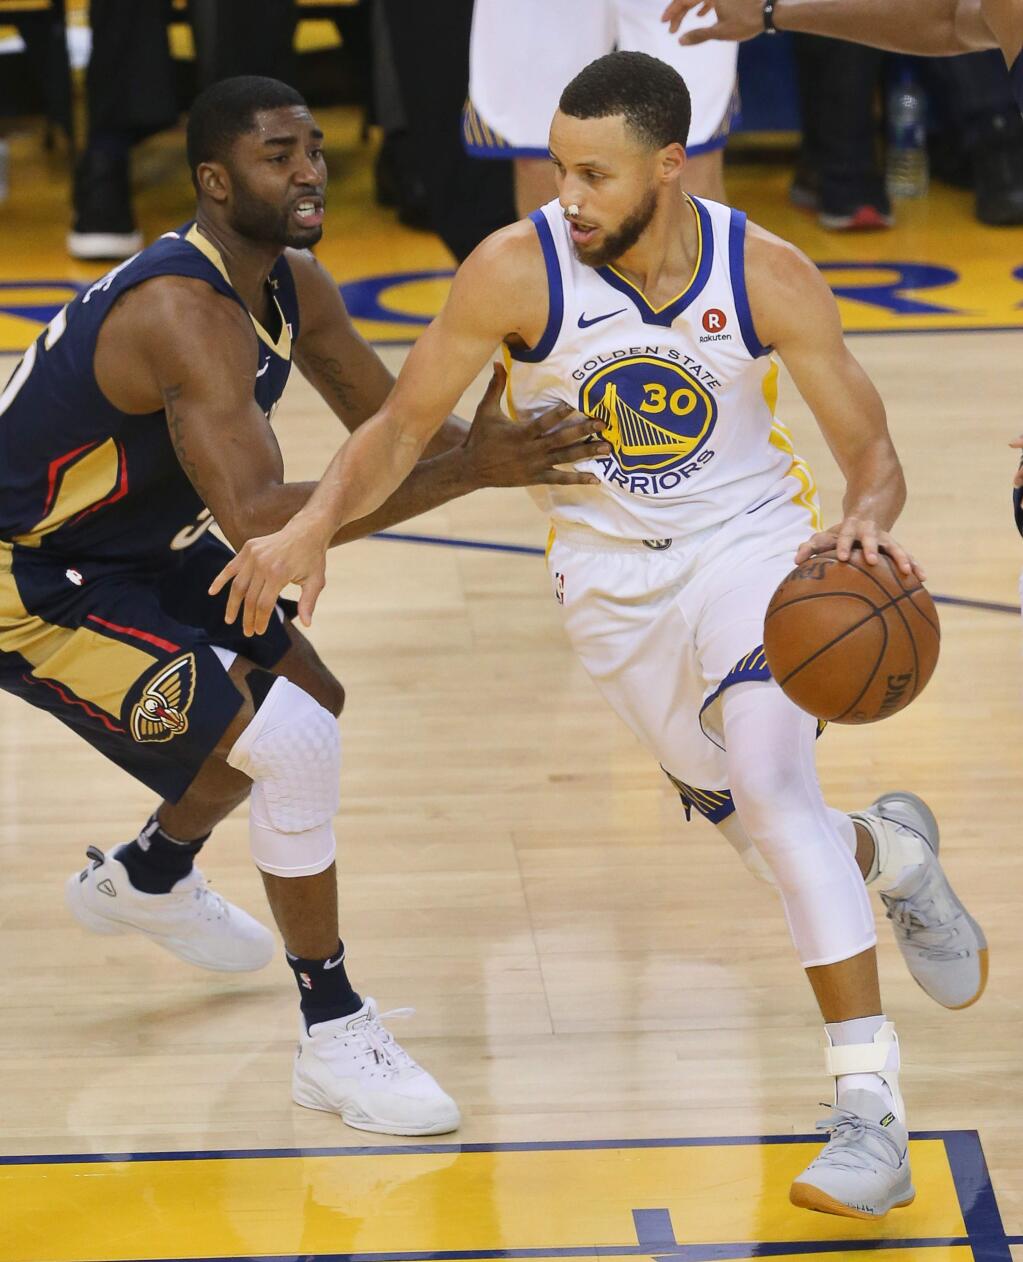 Golden State Warriors guard Stephen Curry drives around New Orleans Pelicans forward E'Twaun Moore, during their game in Oakland on Tuesday, May 8, 2018. (Christopher Chung/ The Press Democrat)